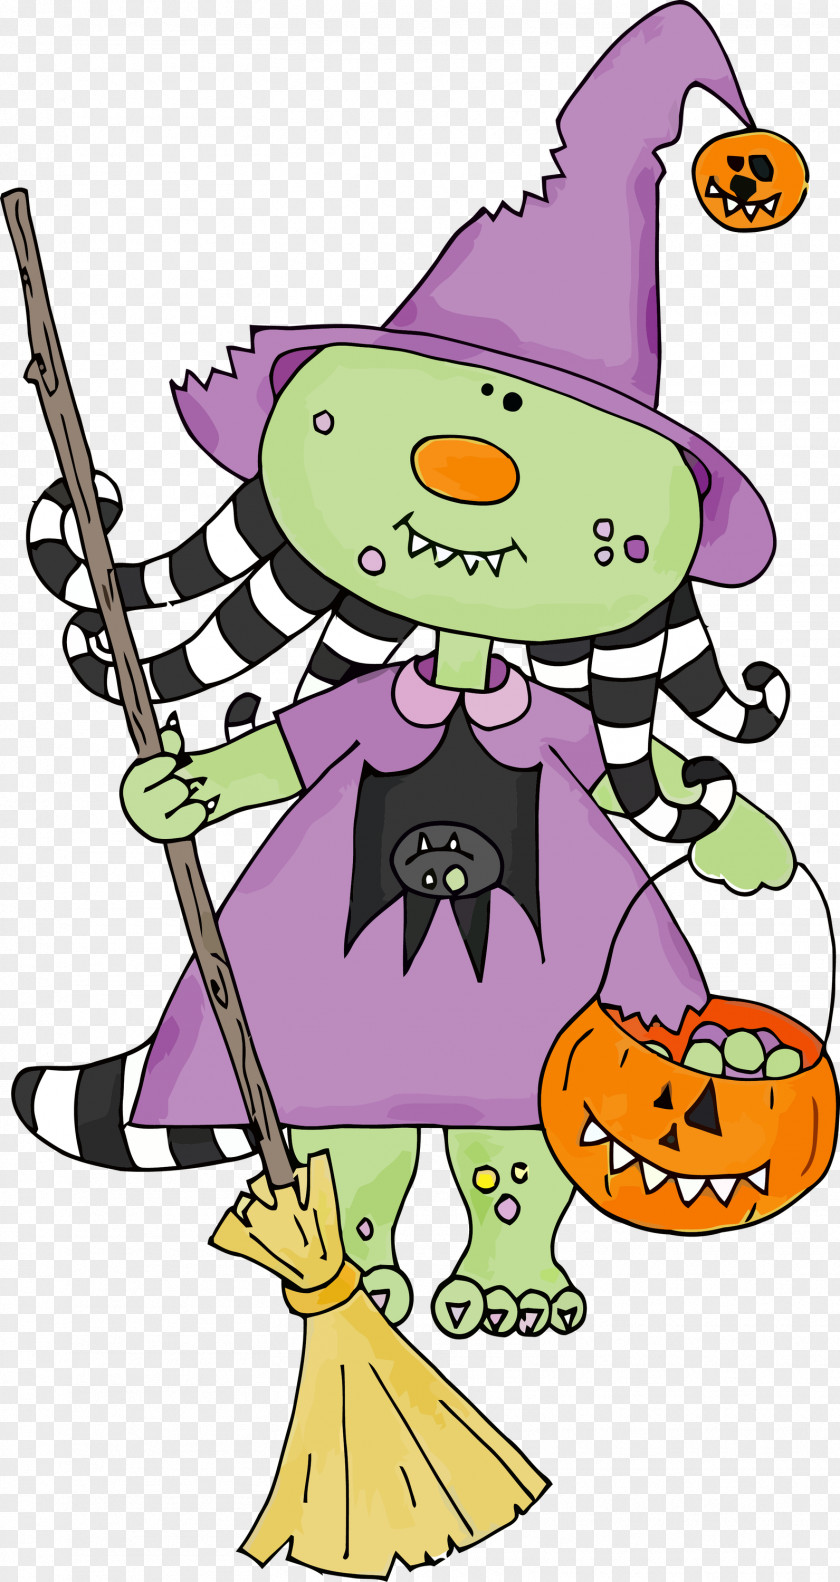 Household Cleaning Supply Cartoon Little Witch Pumpkin Broom PNG